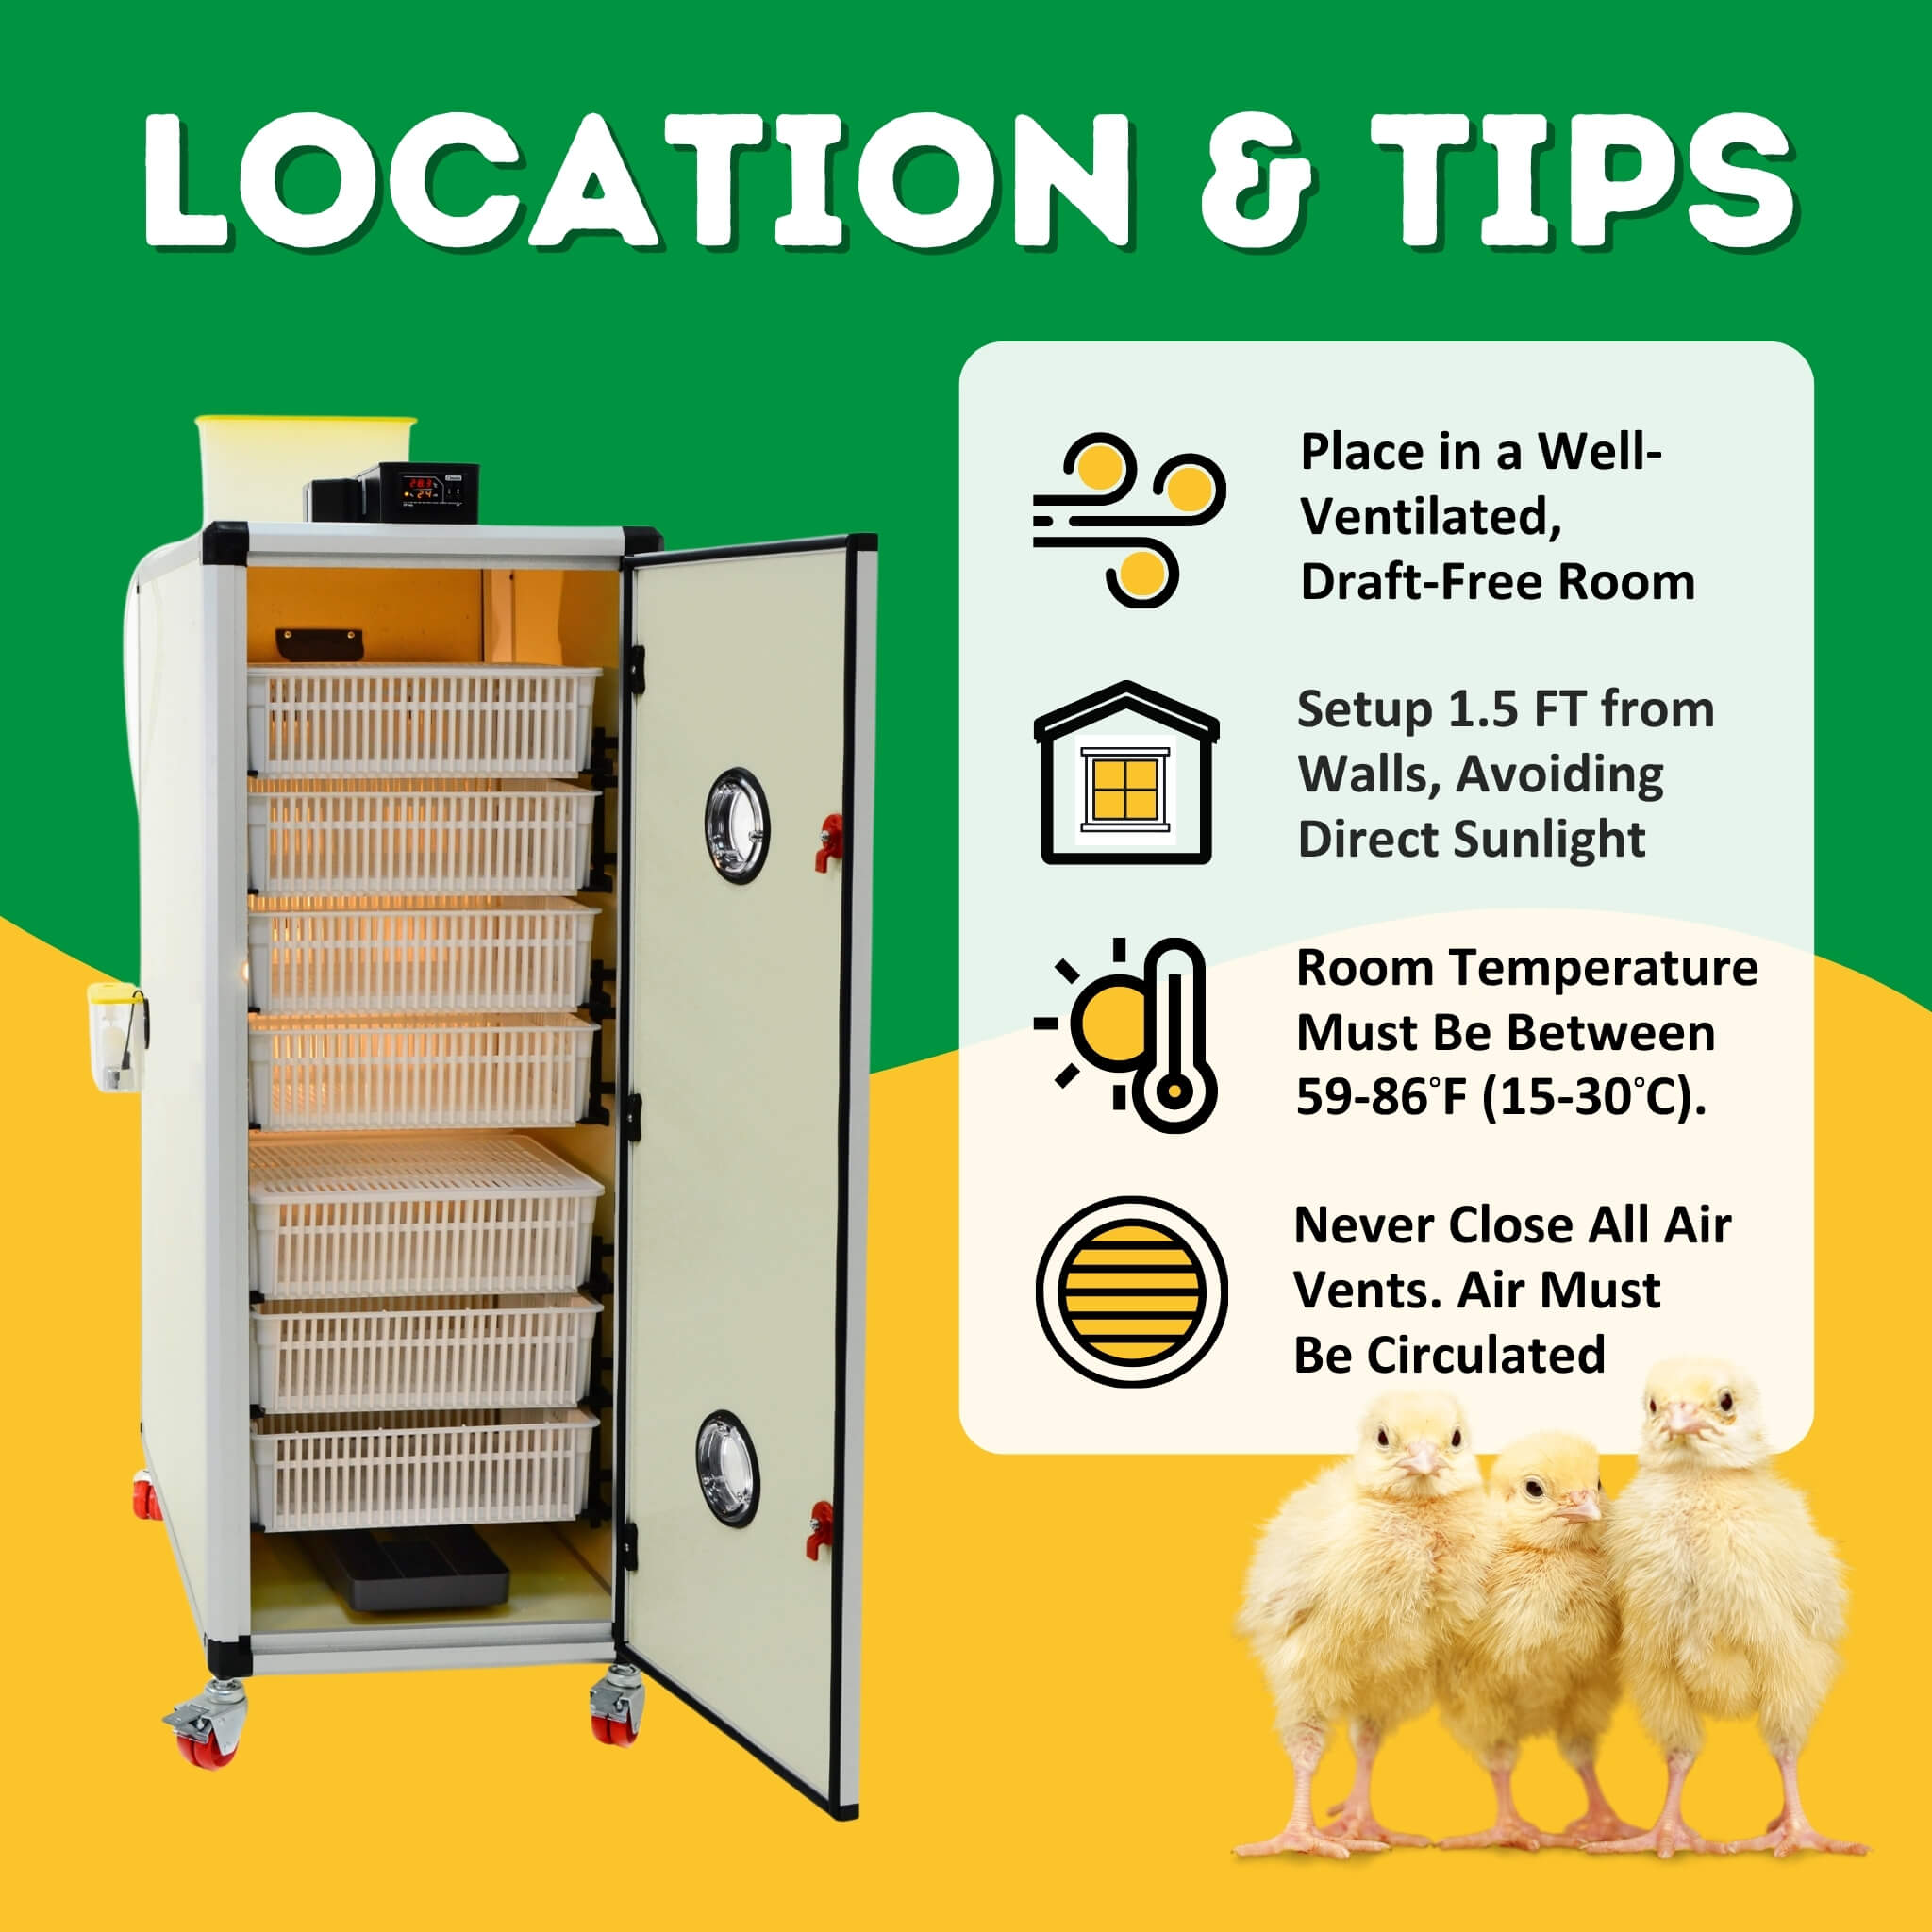 Hatching Time Cimuka. Informative guide on optimal placement of Cimuka HB500S incubator, emphasizing ventilation and space requirements for efficient poultry hatching.